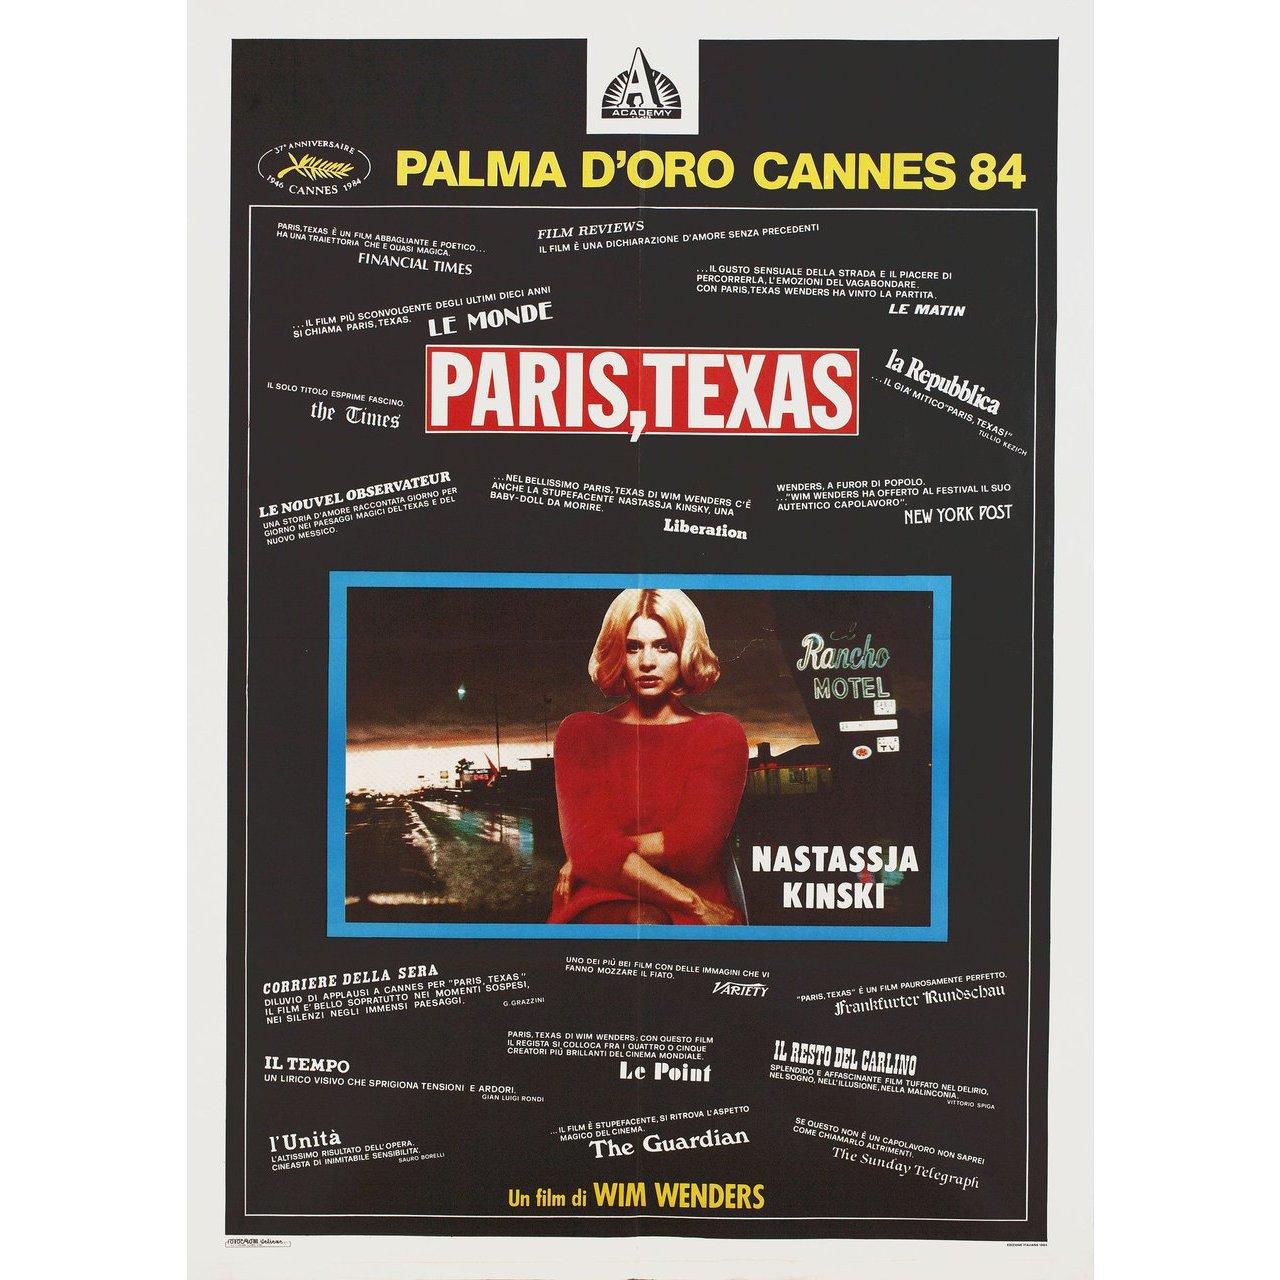 Original 1984 Italian due fogli poster for the film Paris, Texas directed by Wim Wenders with Nastassja Kinski / Harry Dean Stanton / Sam Berry / Bernhard Wicki / Dean Stockwell. Very Good condition, folded. Many original posters were issued folded